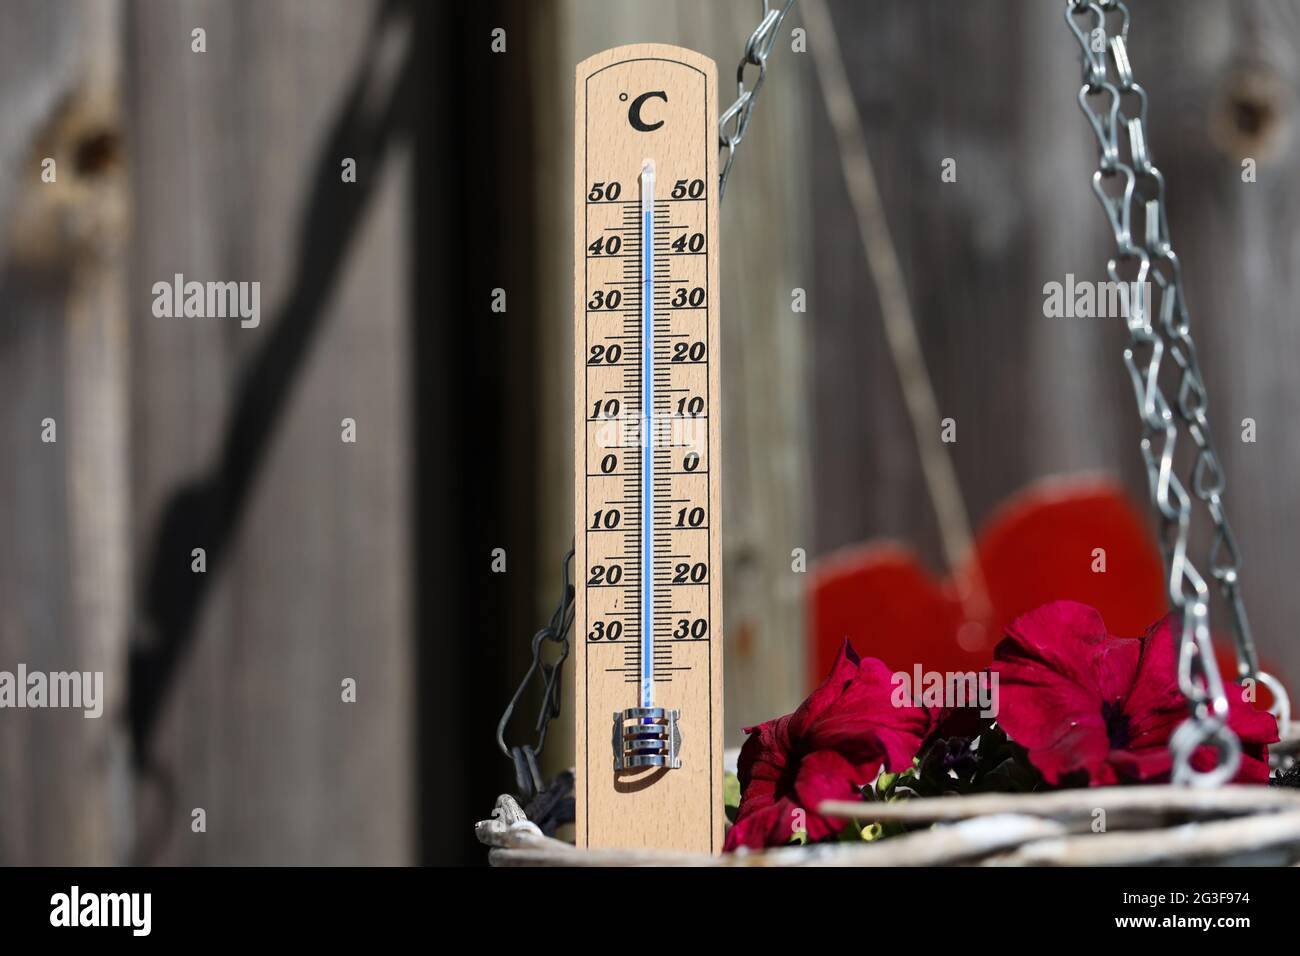 https://c8.alamy.com/comp/2G3F974/thermometer-shows-high-temperatures-on-a-hot-summer-day-2G3F974.jpg